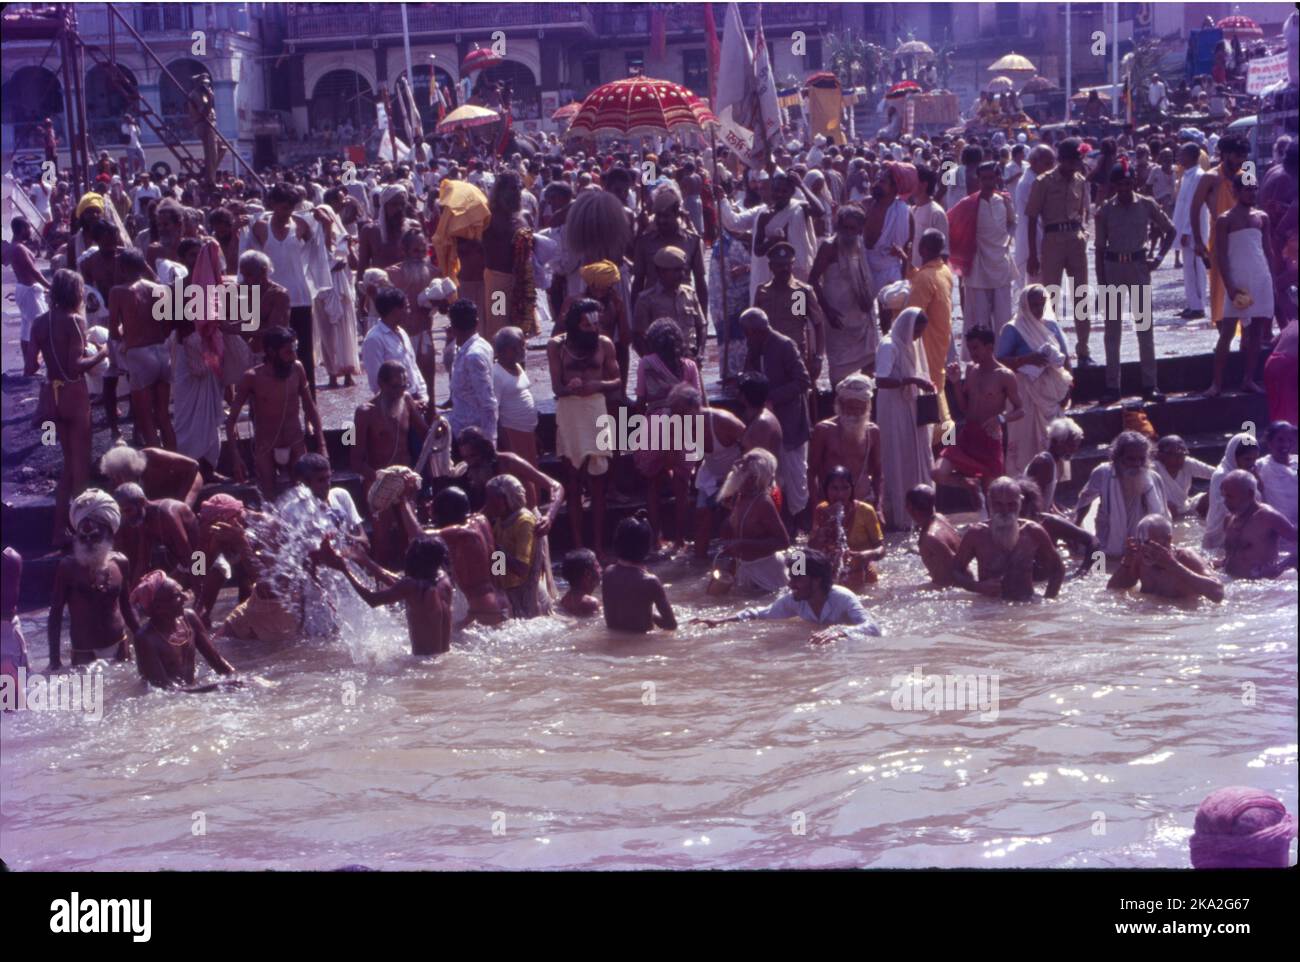 Kumbh Mela is a mass congregation of pilgrims who gather to take a bath/dip in a sacred river. The geographical location for the Kumbh Mela spans across four cities within India. Kumbha Mela is a major pilgrimage and festival in Hinduism. It is celebrated in a cycle of approximately 12 years, to celebrate every revolution Brihaspati completes, at four river-bank pilgrimage sites: Allahabad, Haridwar, Nashik, and Ujjain. Stock Photo